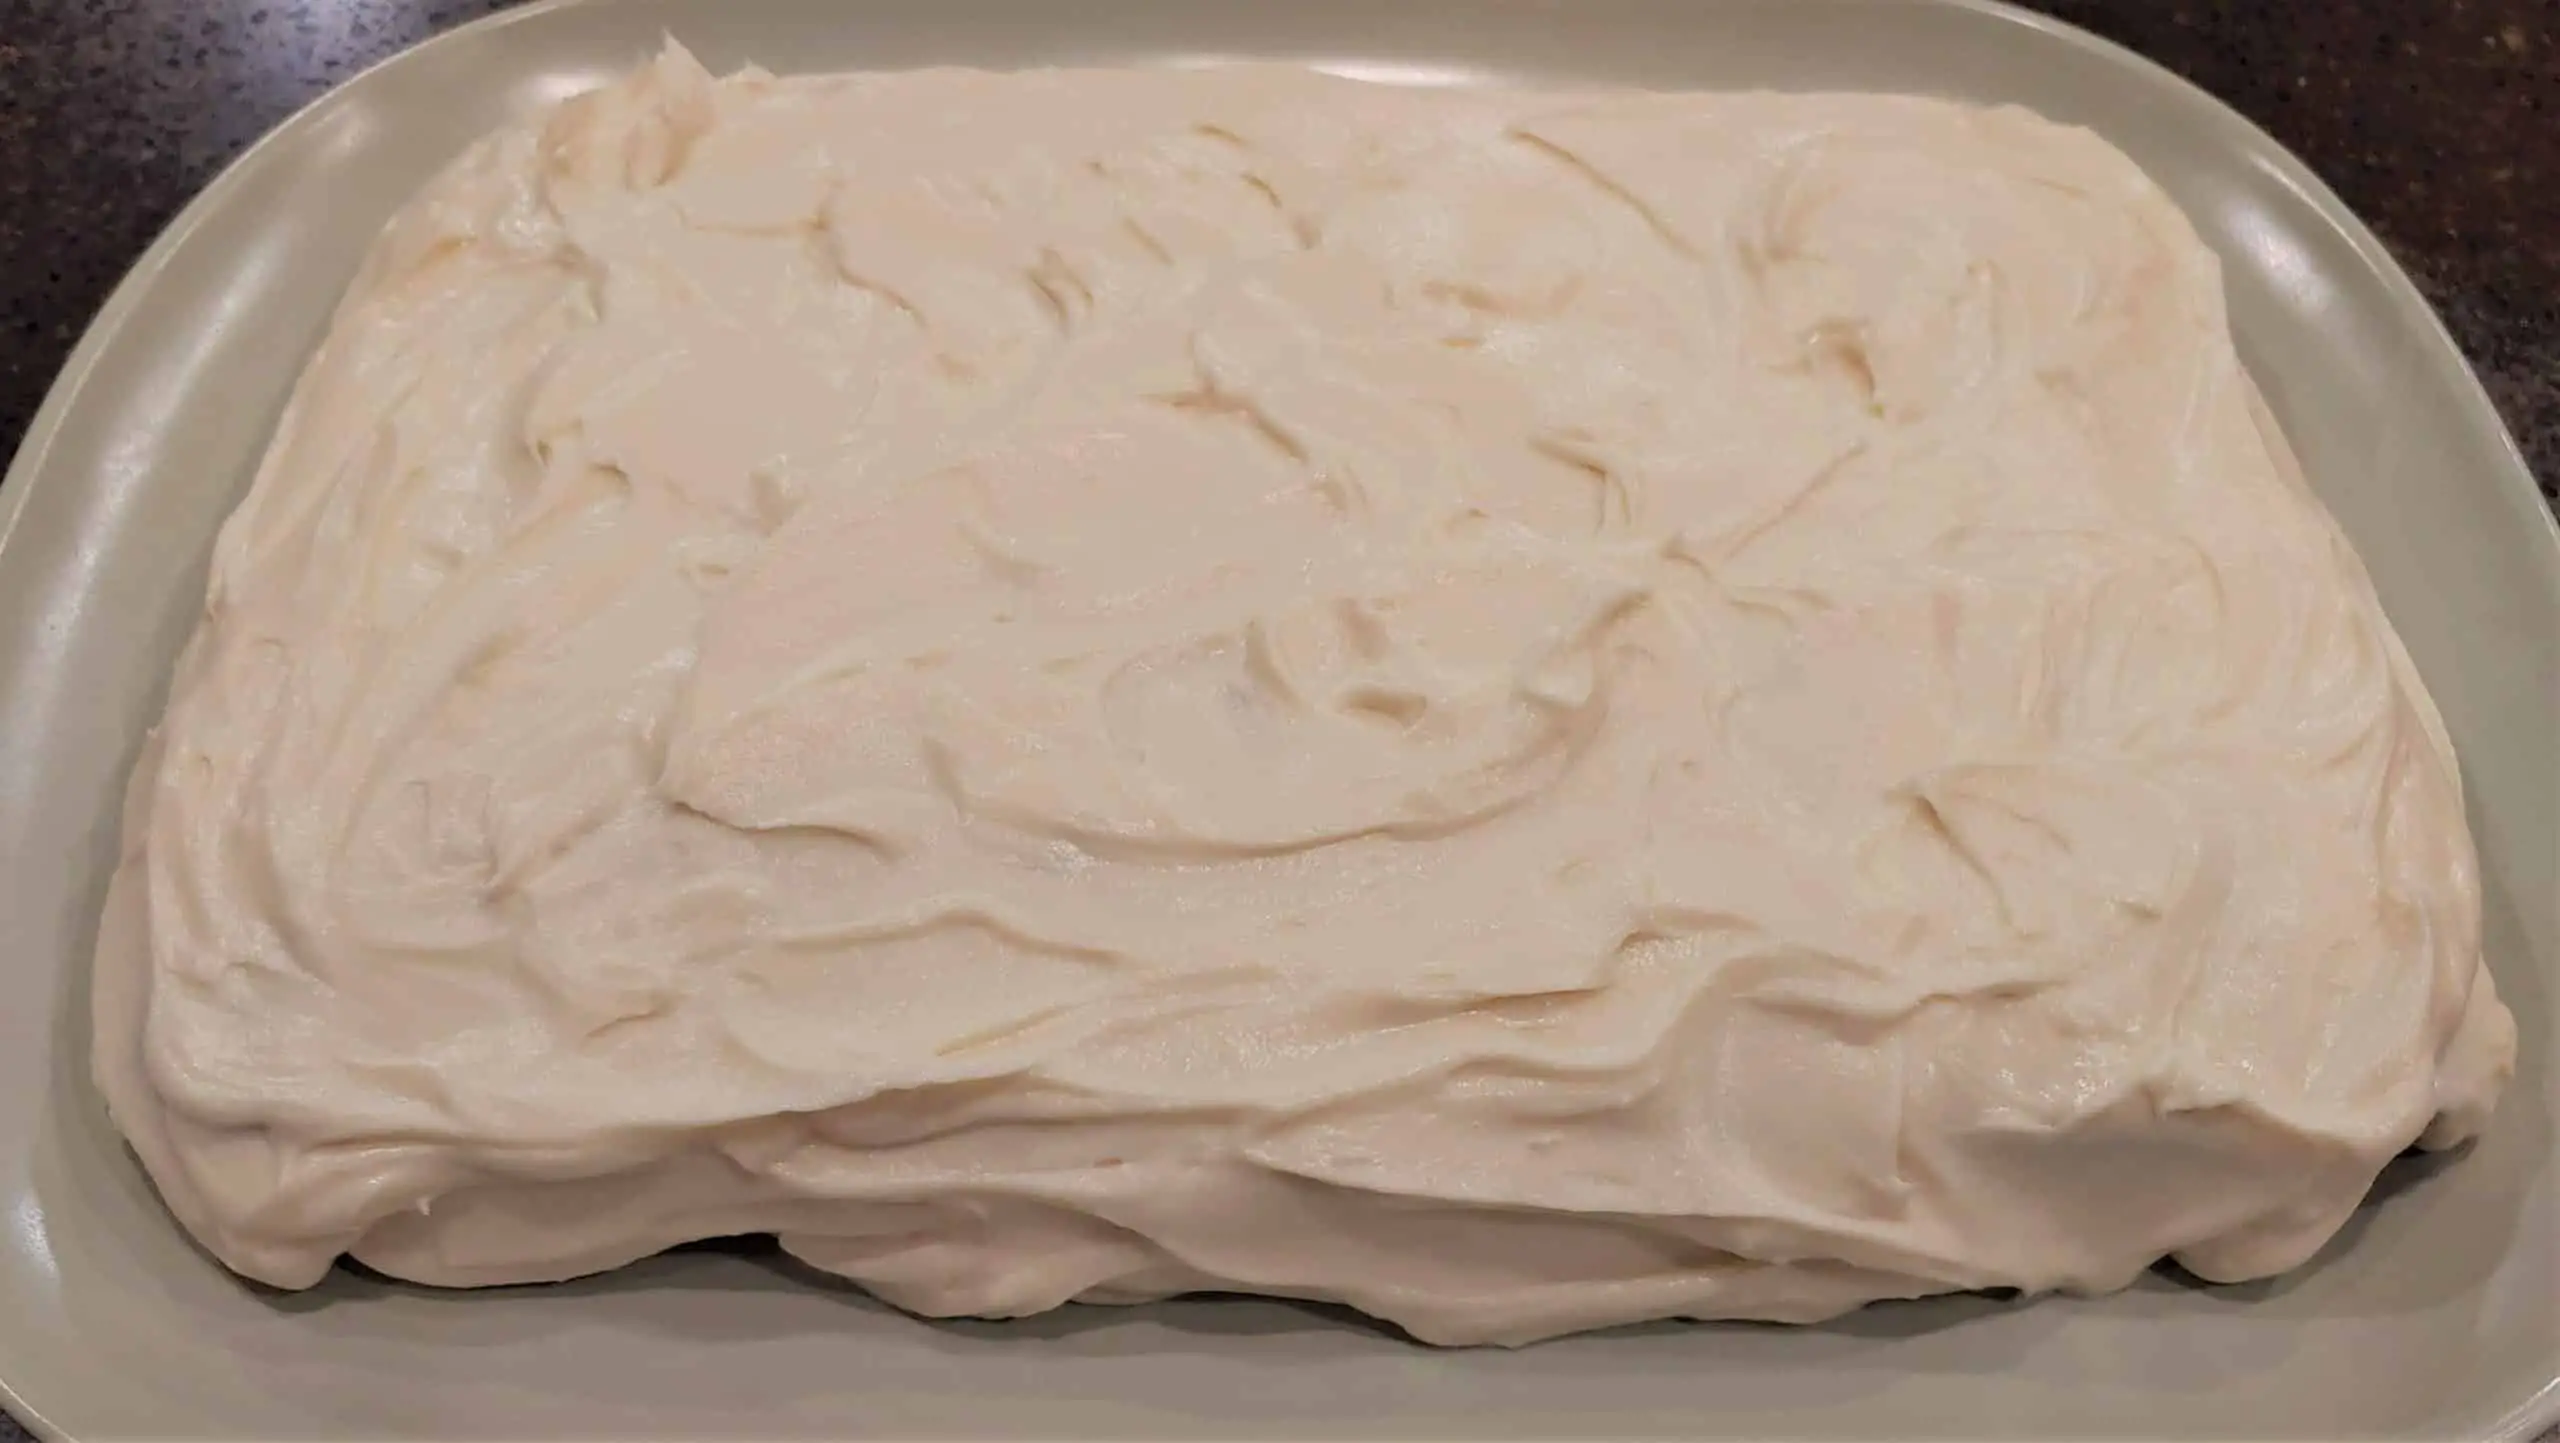 Pumpkin Cake with cream cheese frosting - Dining in with Danielle